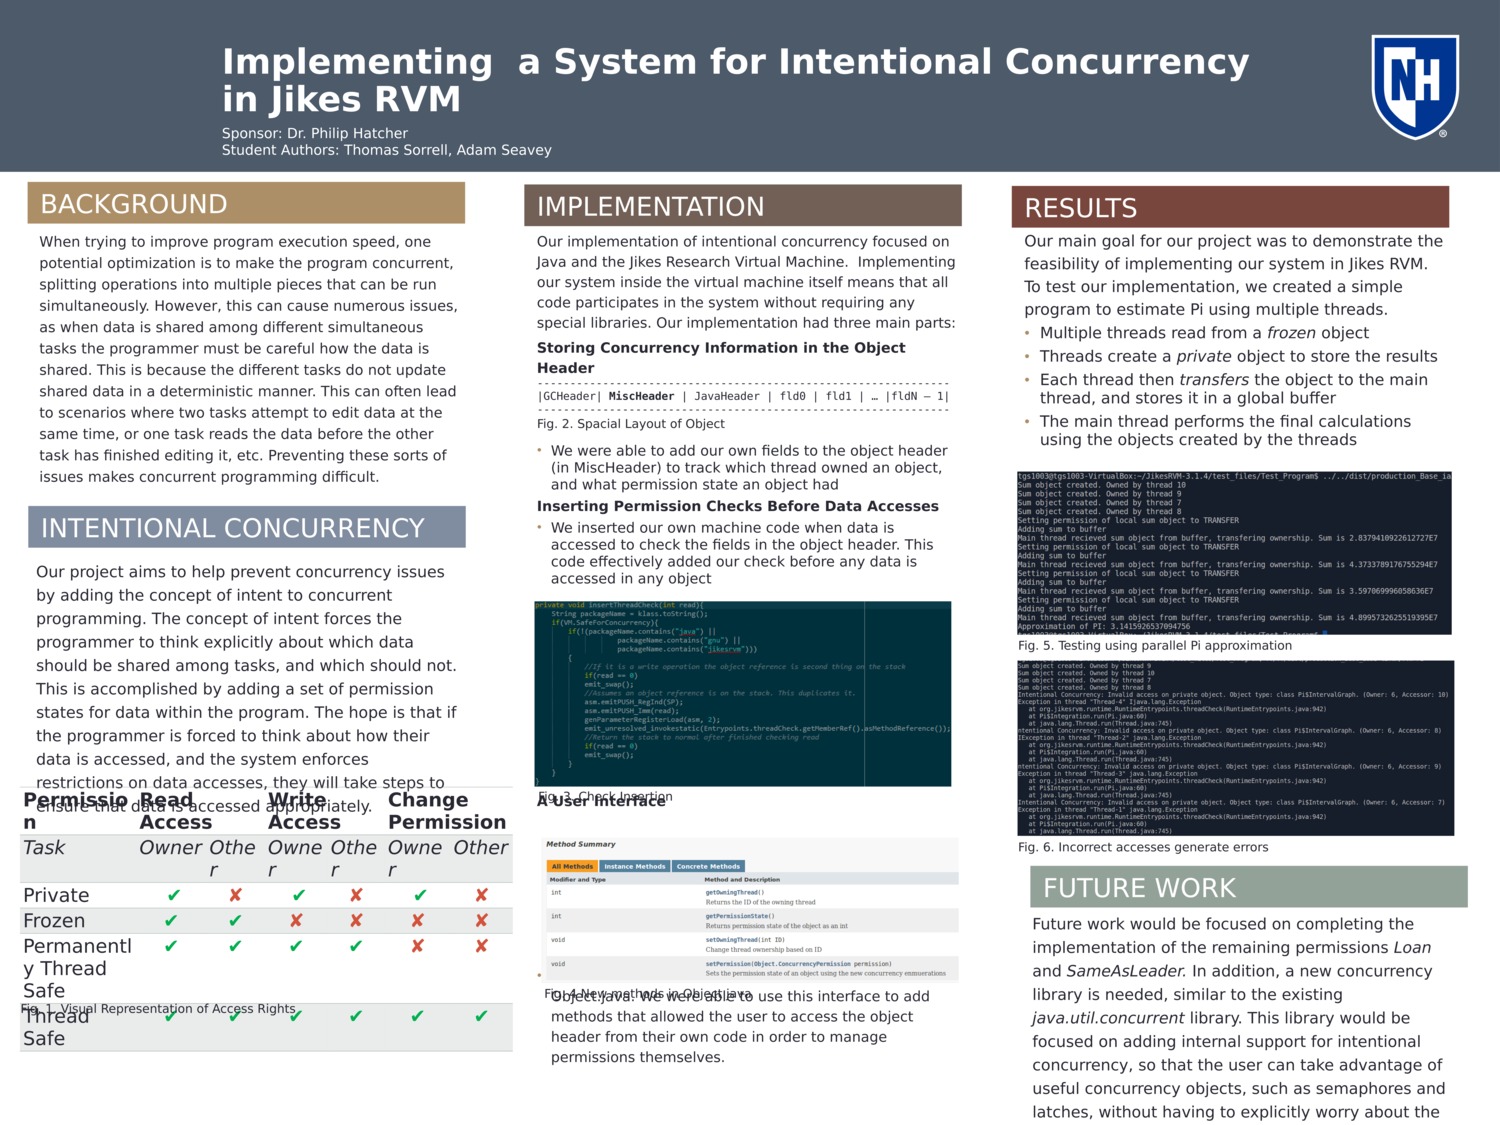 Implementing A System For Intentional Concurrency In Jikes Rvm by tgs1003